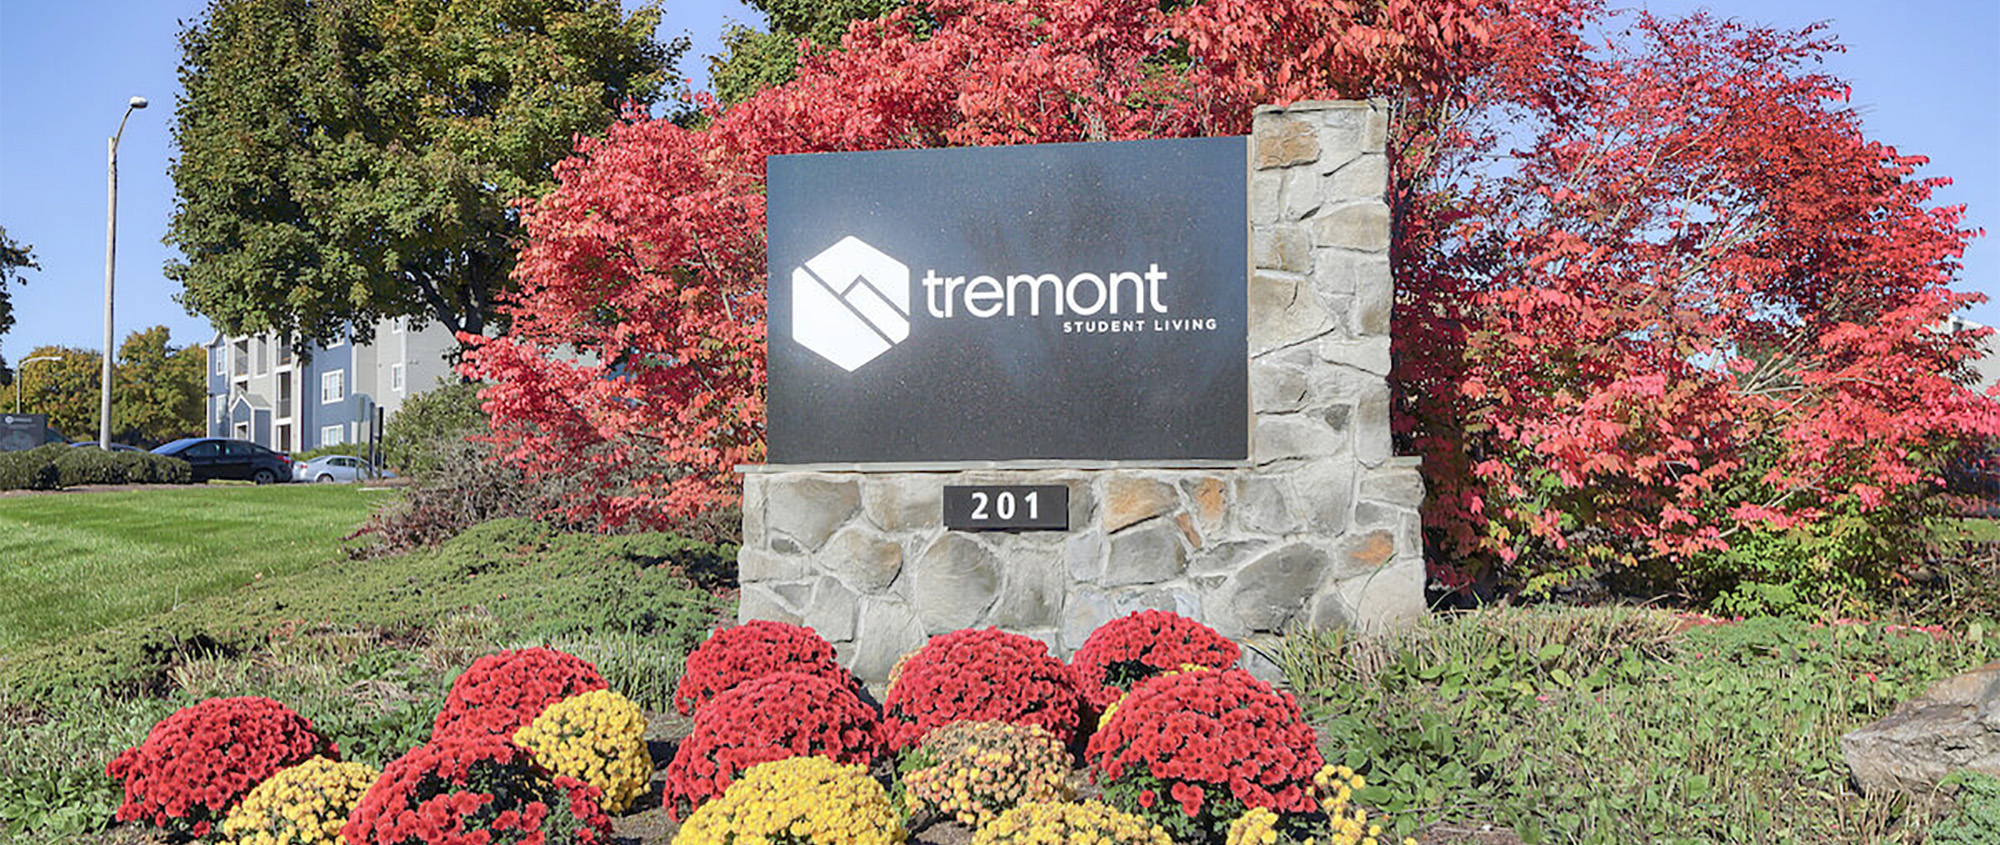 Tremont student living sign